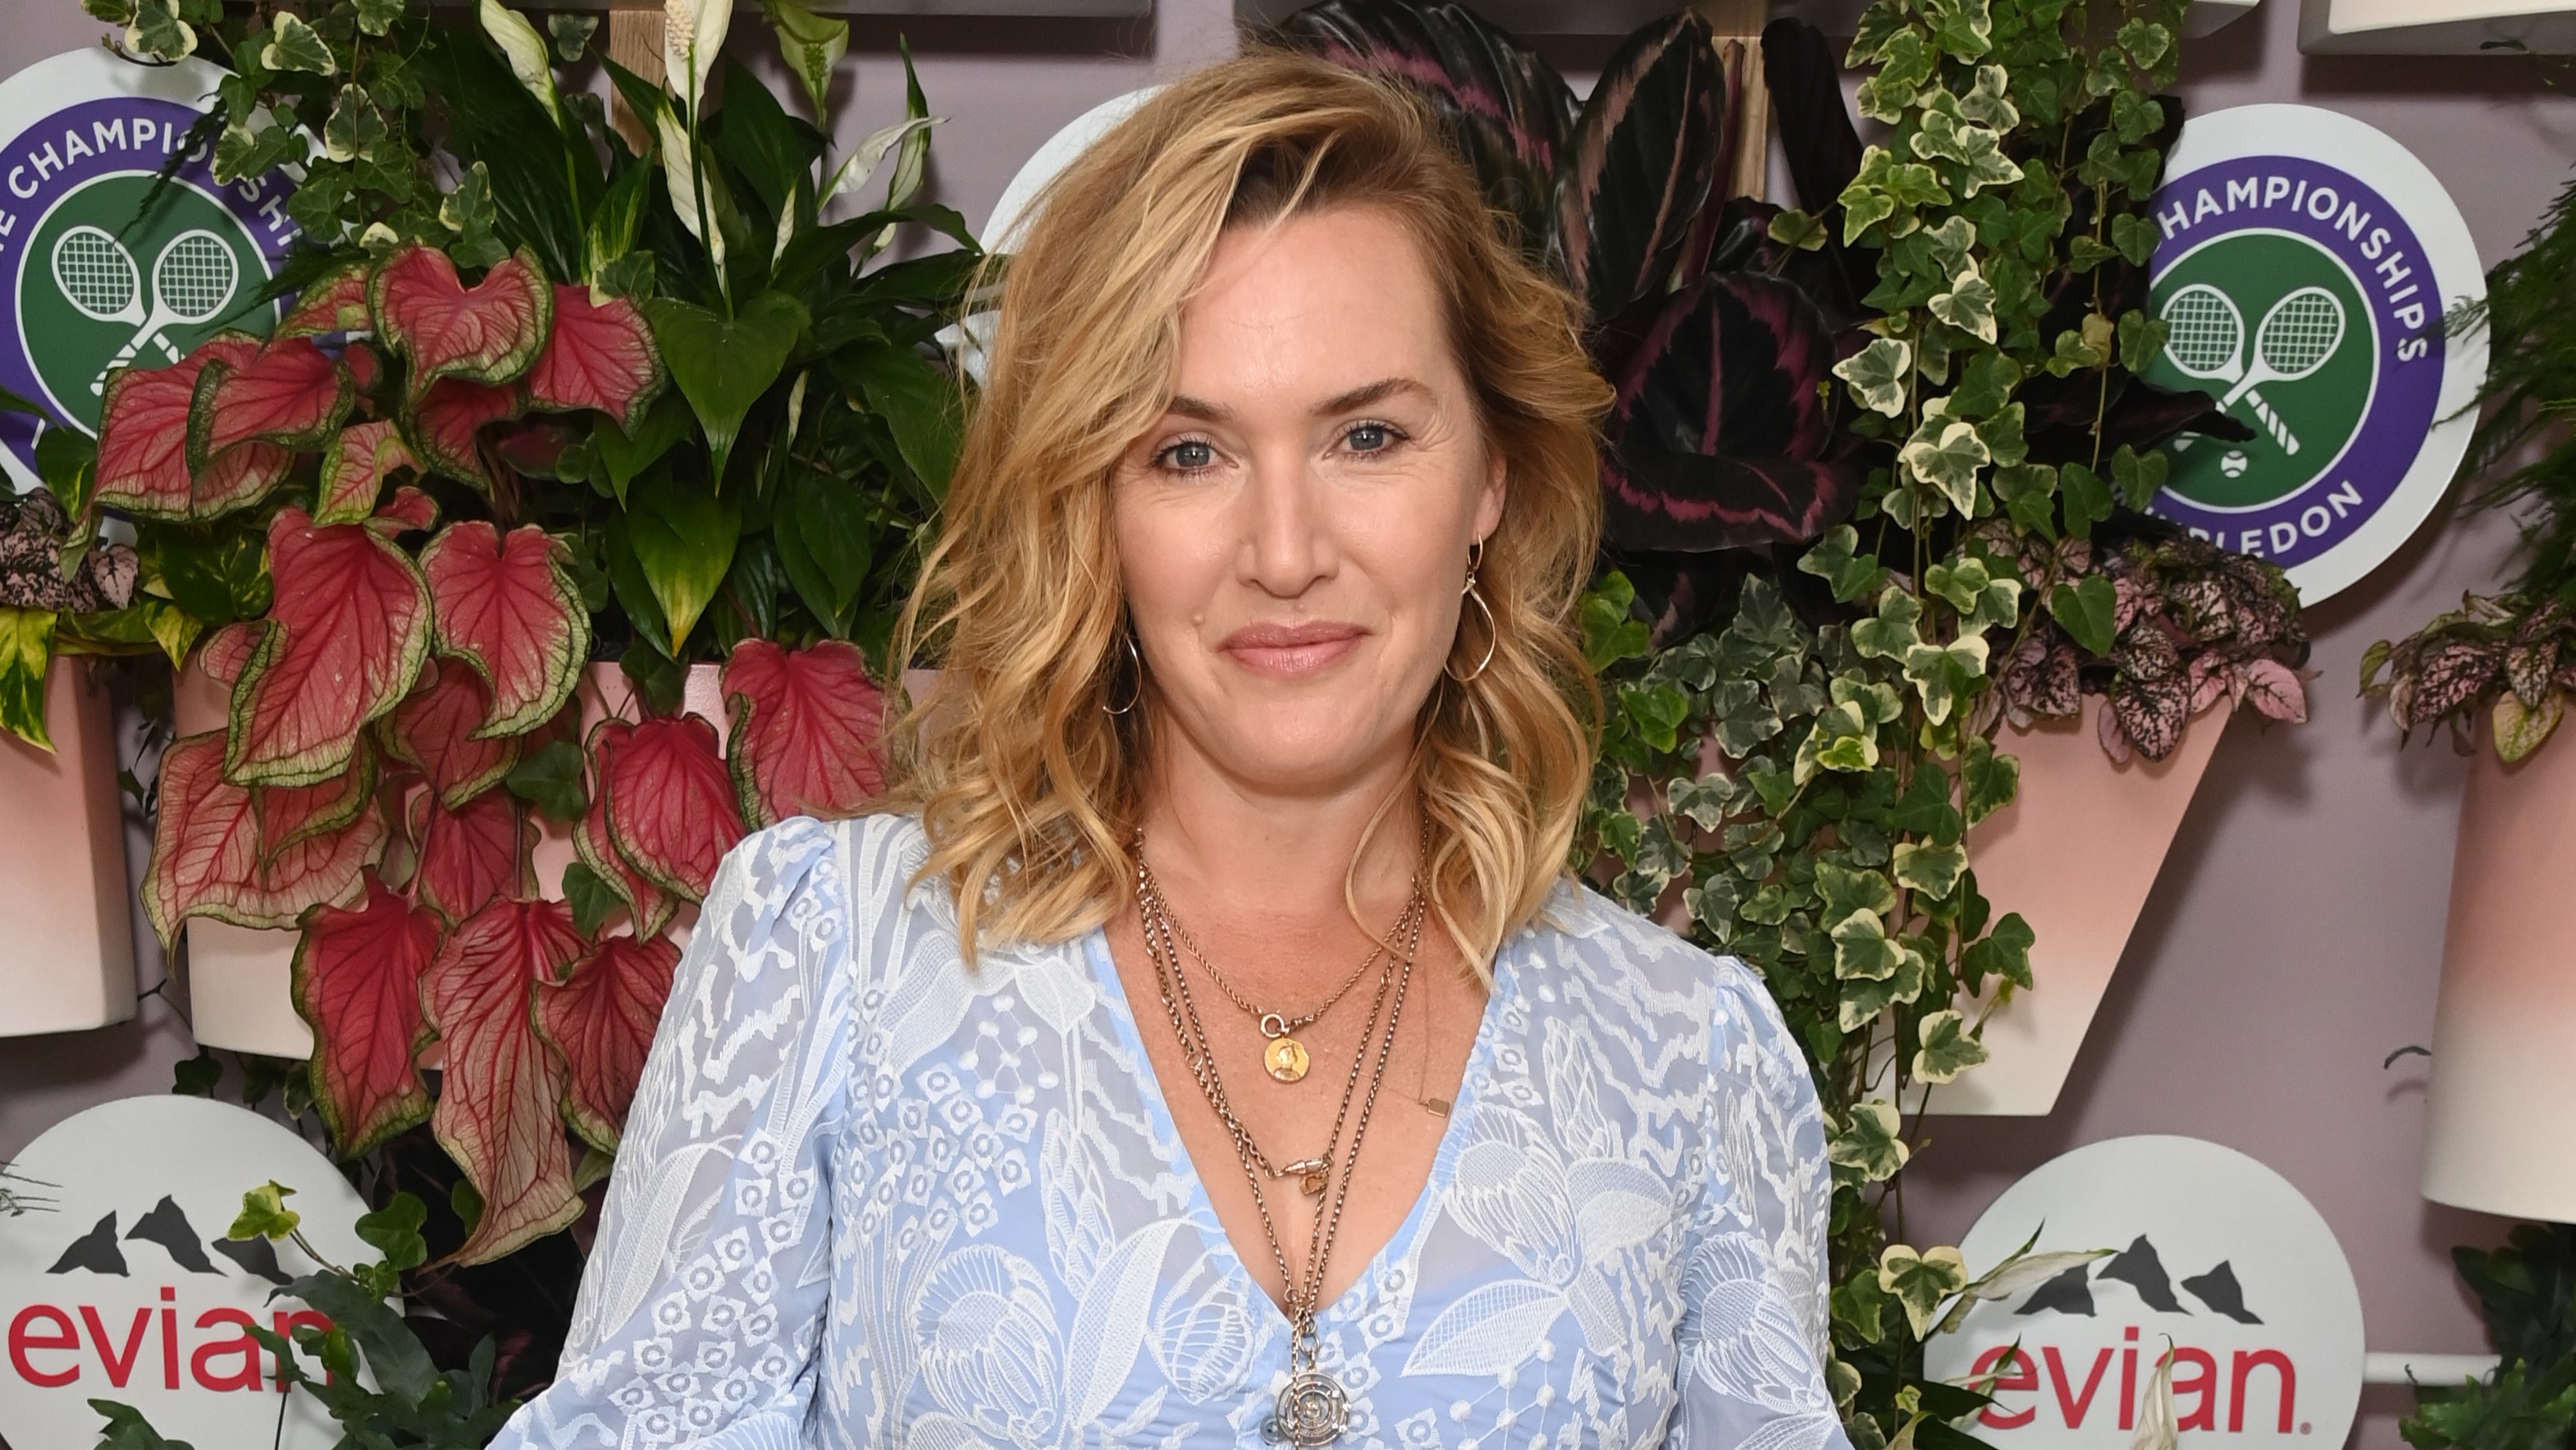  Kate Winslet donates £17,000 to help family struggling with rising energy costs 